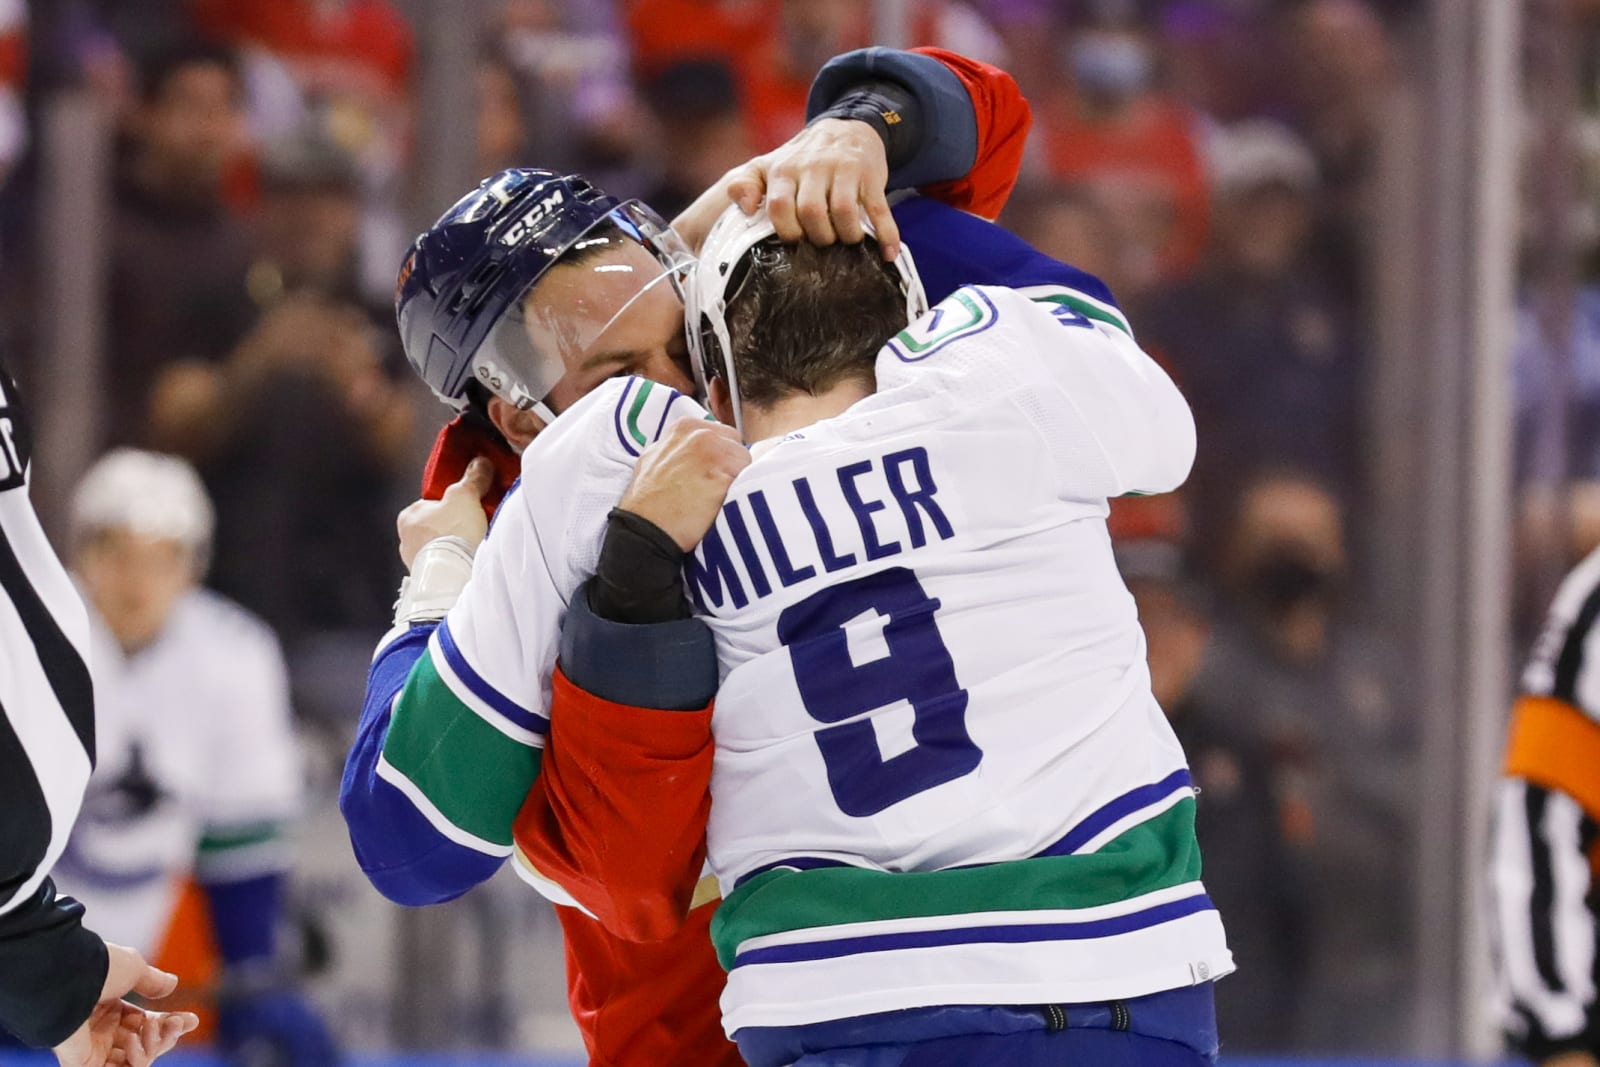 Canucks score 2 goals late, top Panthers 5-3 to snap a 2-game losing streak  - The San Diego Union-Tribune